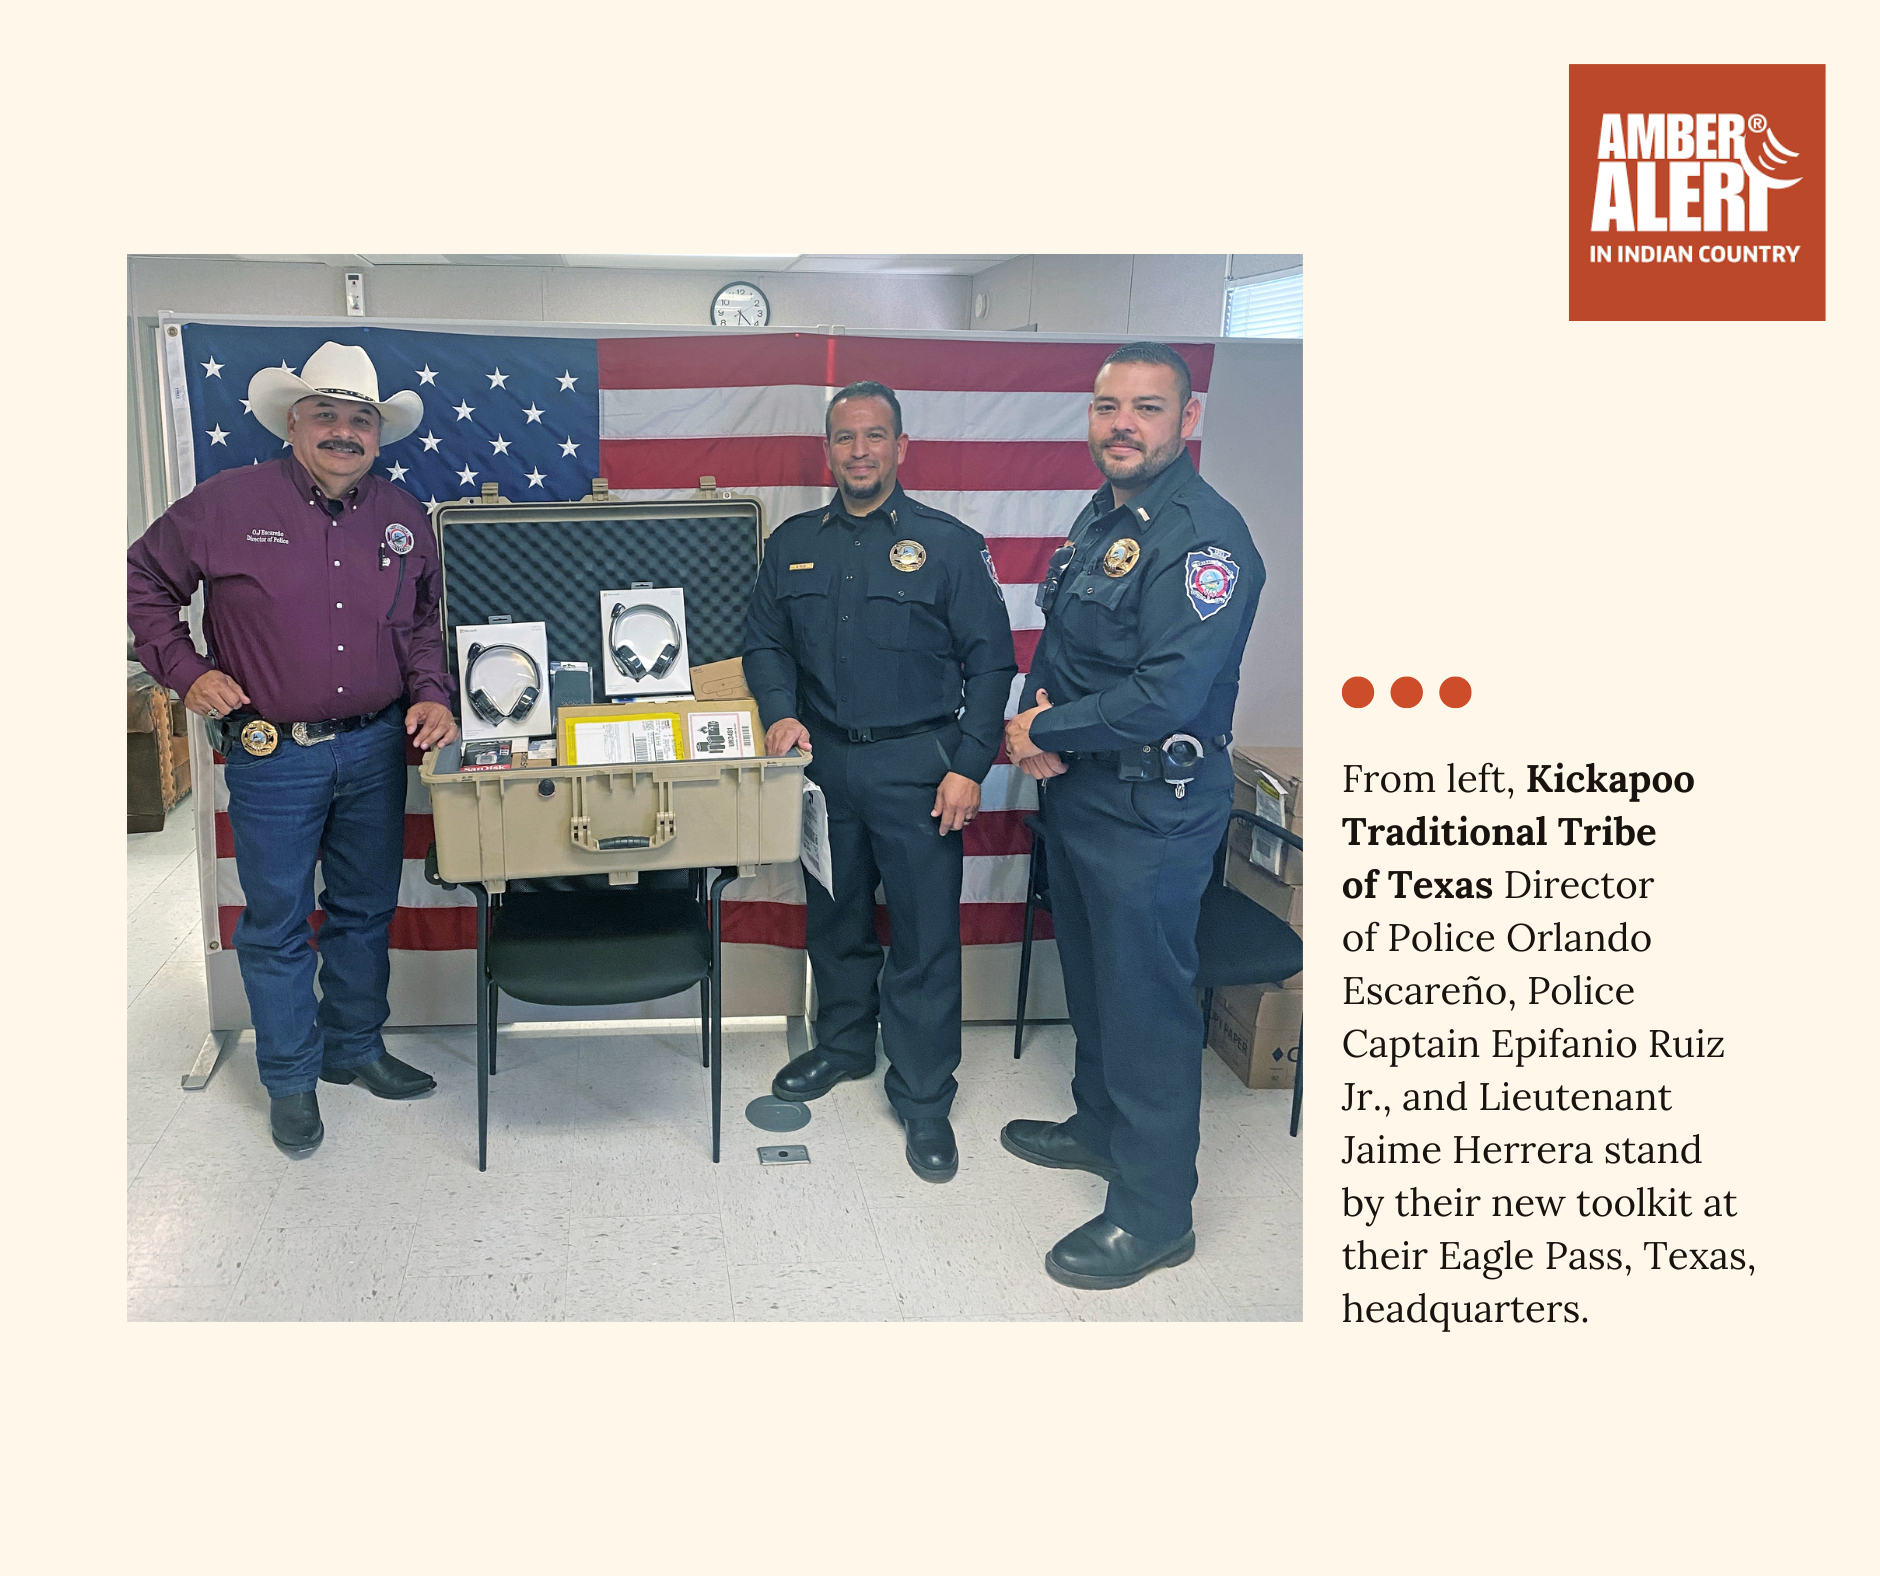 From left, Kickapoo Traditional Tribe of Texas Director of Police Orlando Escareño, Police Captain Epifanio Ruiz Jr., and Lieutenant Jaime Herrera stand by their new toolkit at their Eagle Pass, Texas, headquarters.